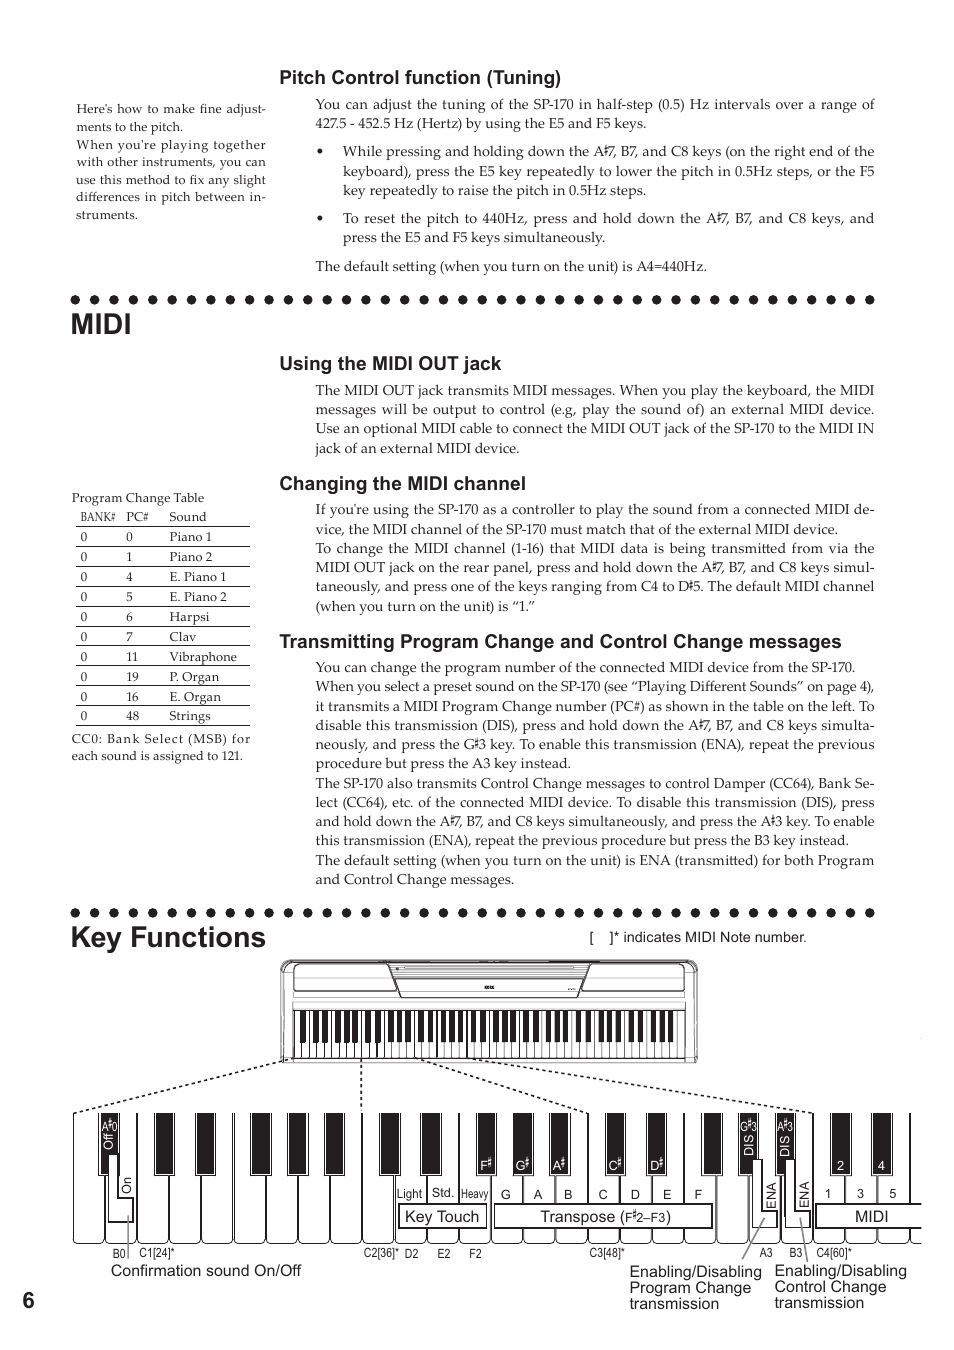 Midi Key Functions Pitch Control Function Tuning Korg Digital Piano Sp 170 User Manual Page 6 21 Original Mode